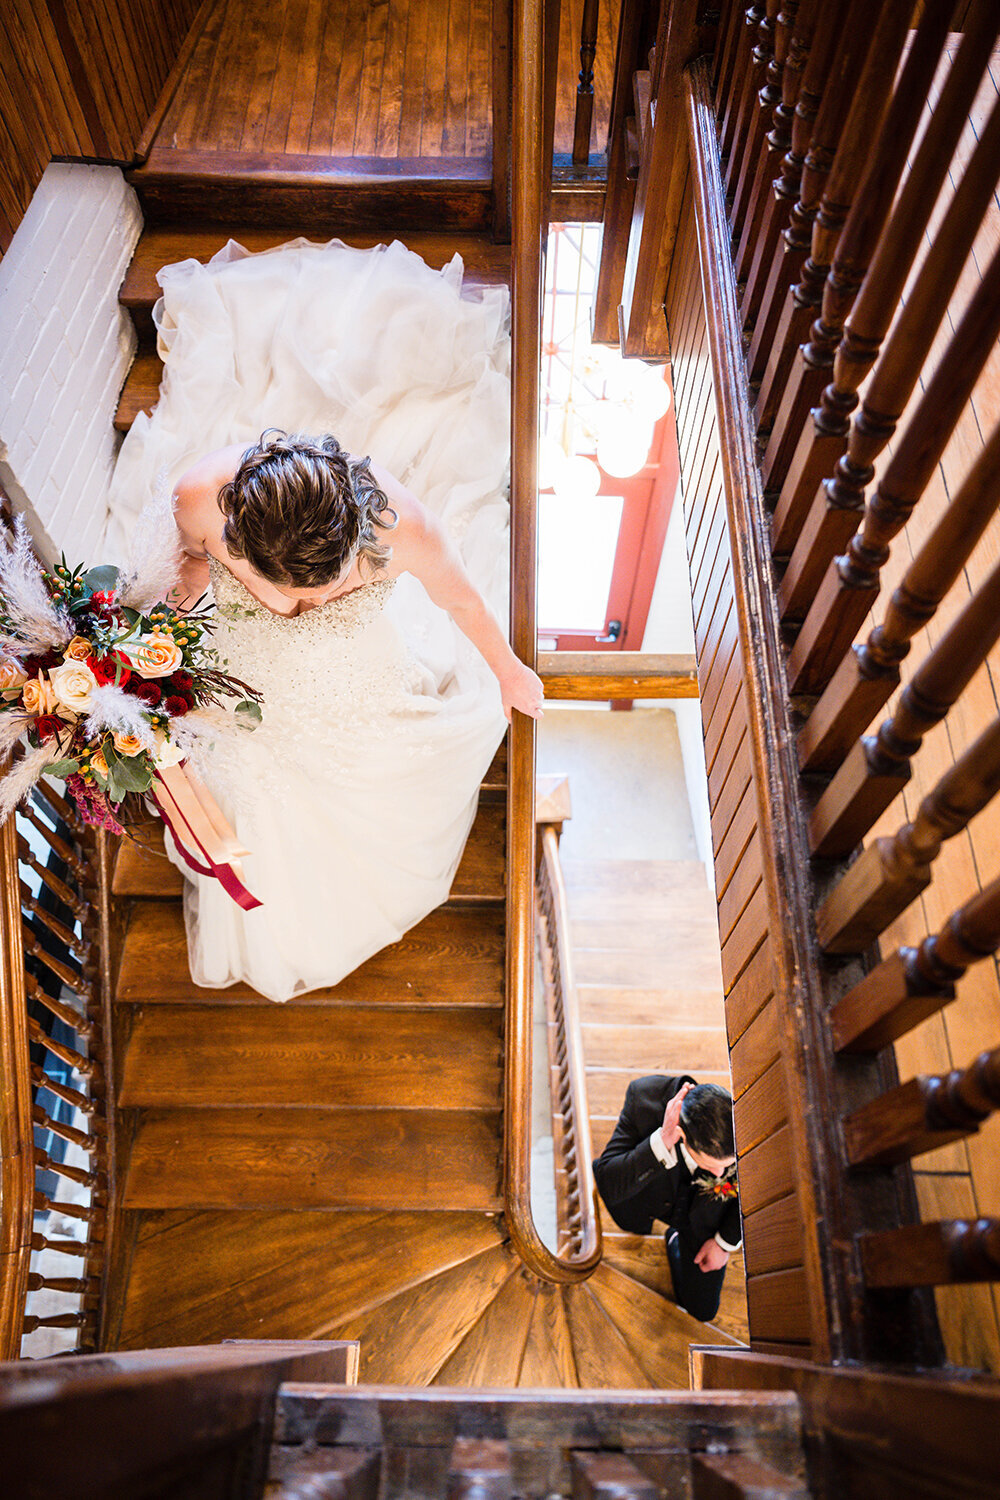 A bride descends the stairs holding onto the railing with one hand and her wedding bouquet in the other while the groom ascends the stairs fixing his hair as the two meet in the center of the staircase for a first look on their elopement day in Virginia.